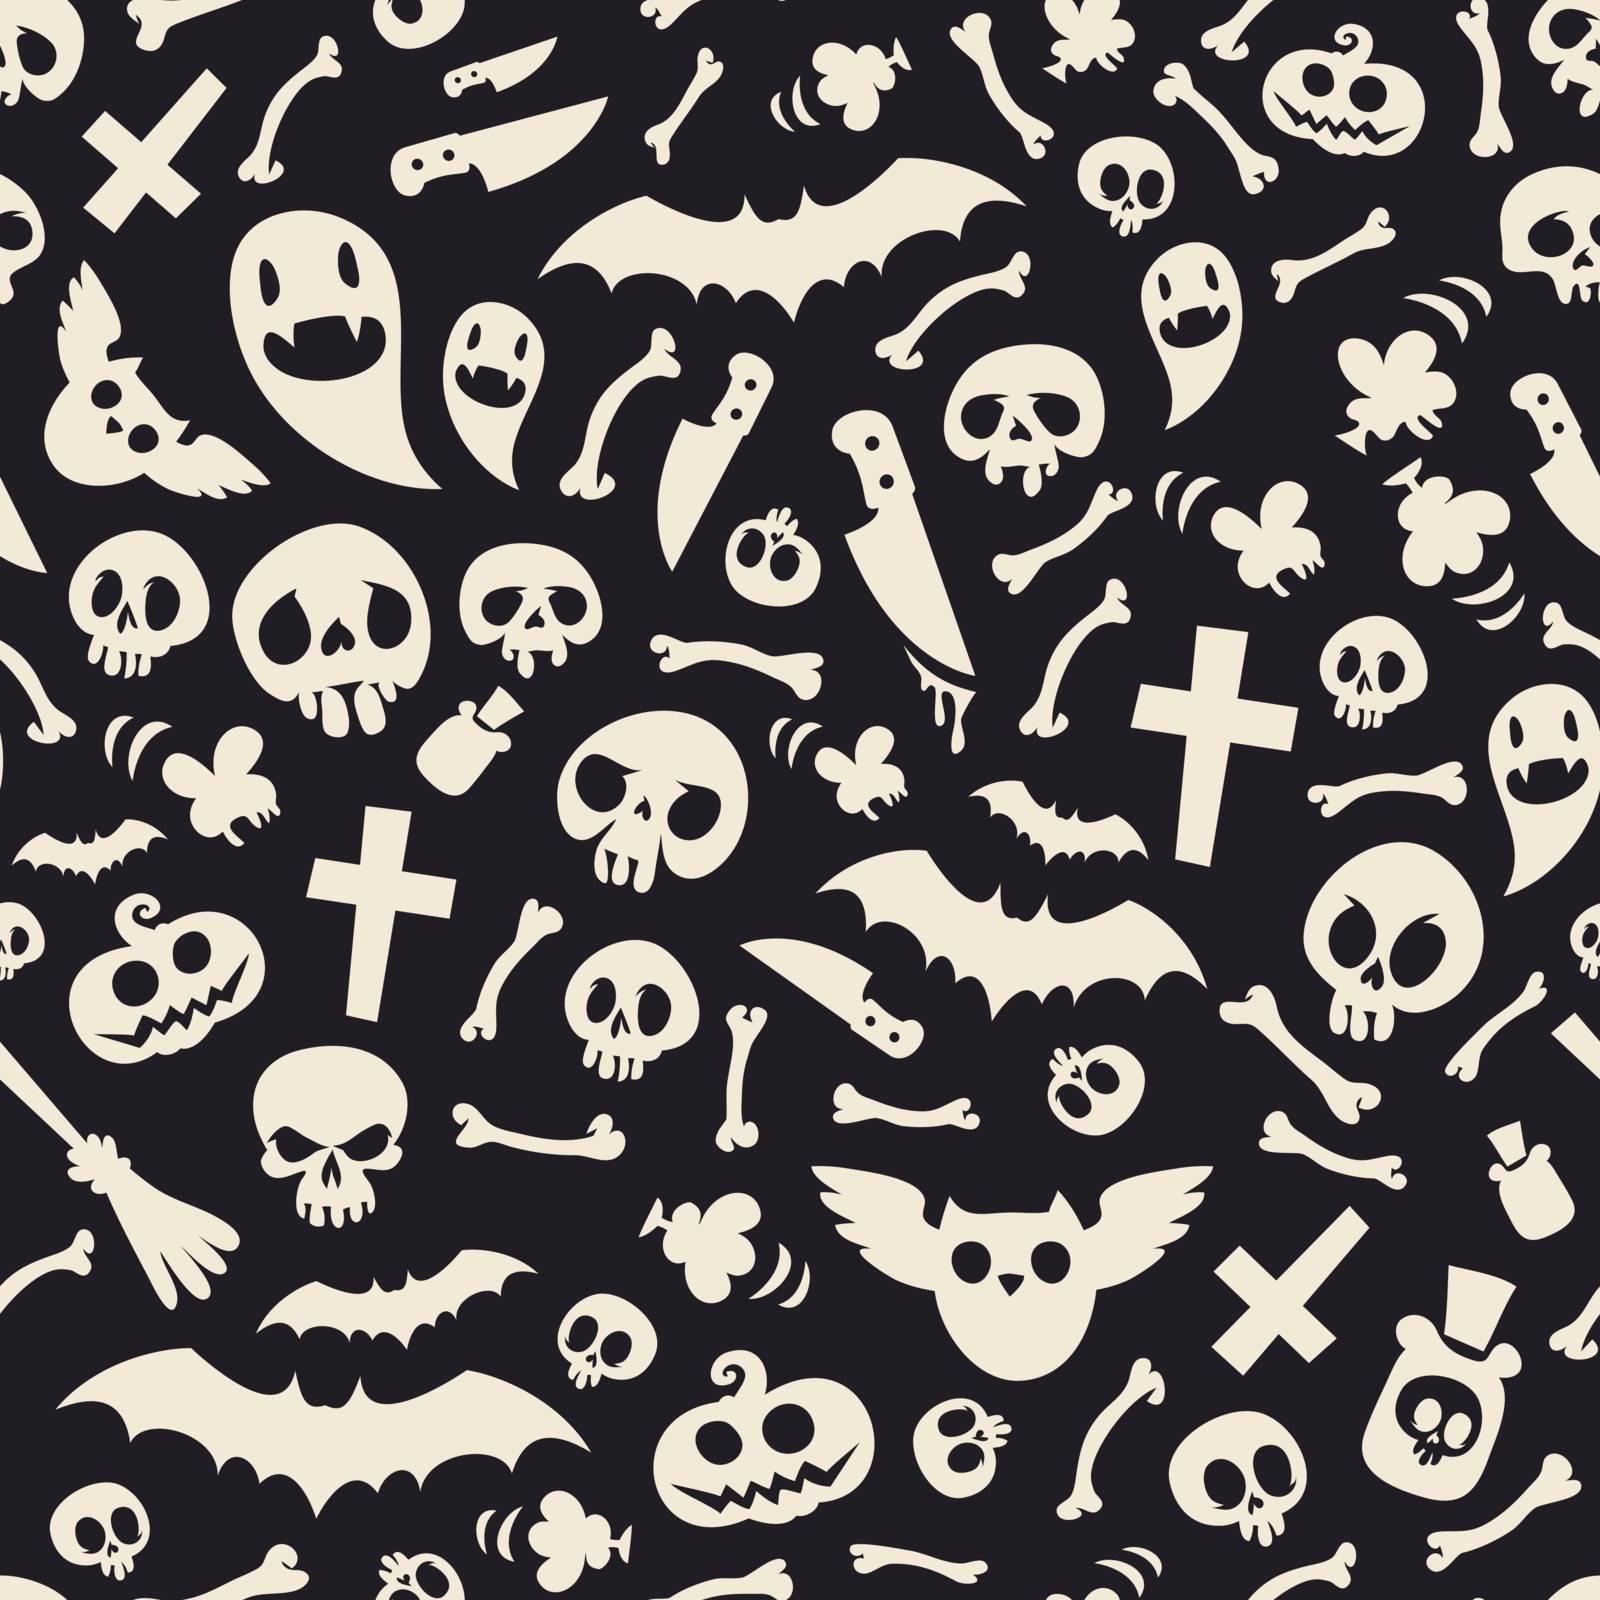 Halloween Symbols Seamless Pattern Contrast. Editable pattern in swatches. Clipping paths included in additional jpg format